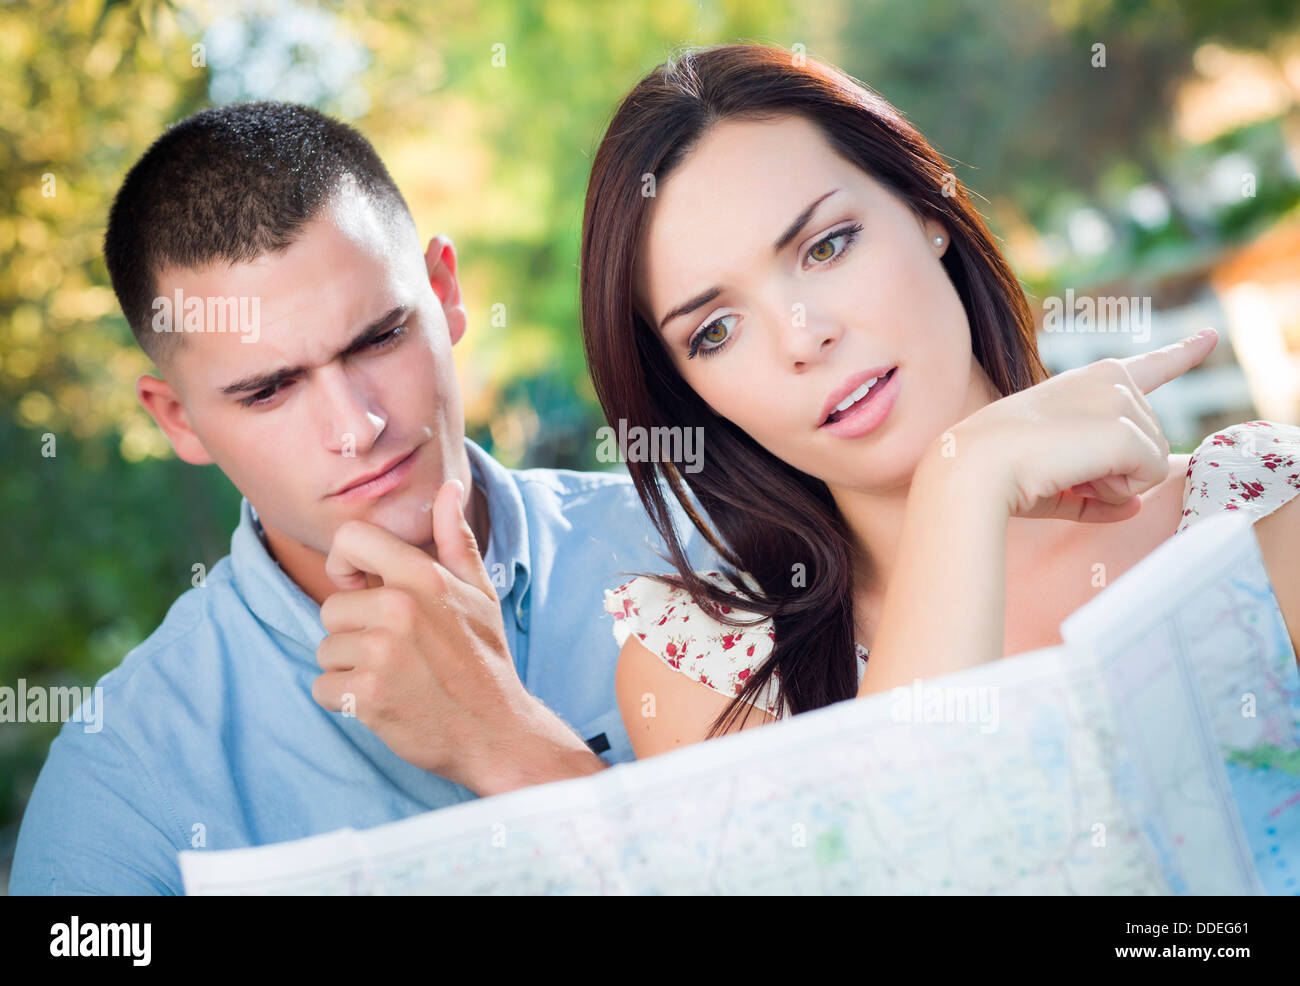 Lost and Confused Mixed Race Couple Looking Over A Map Outside Together. Stock Photo